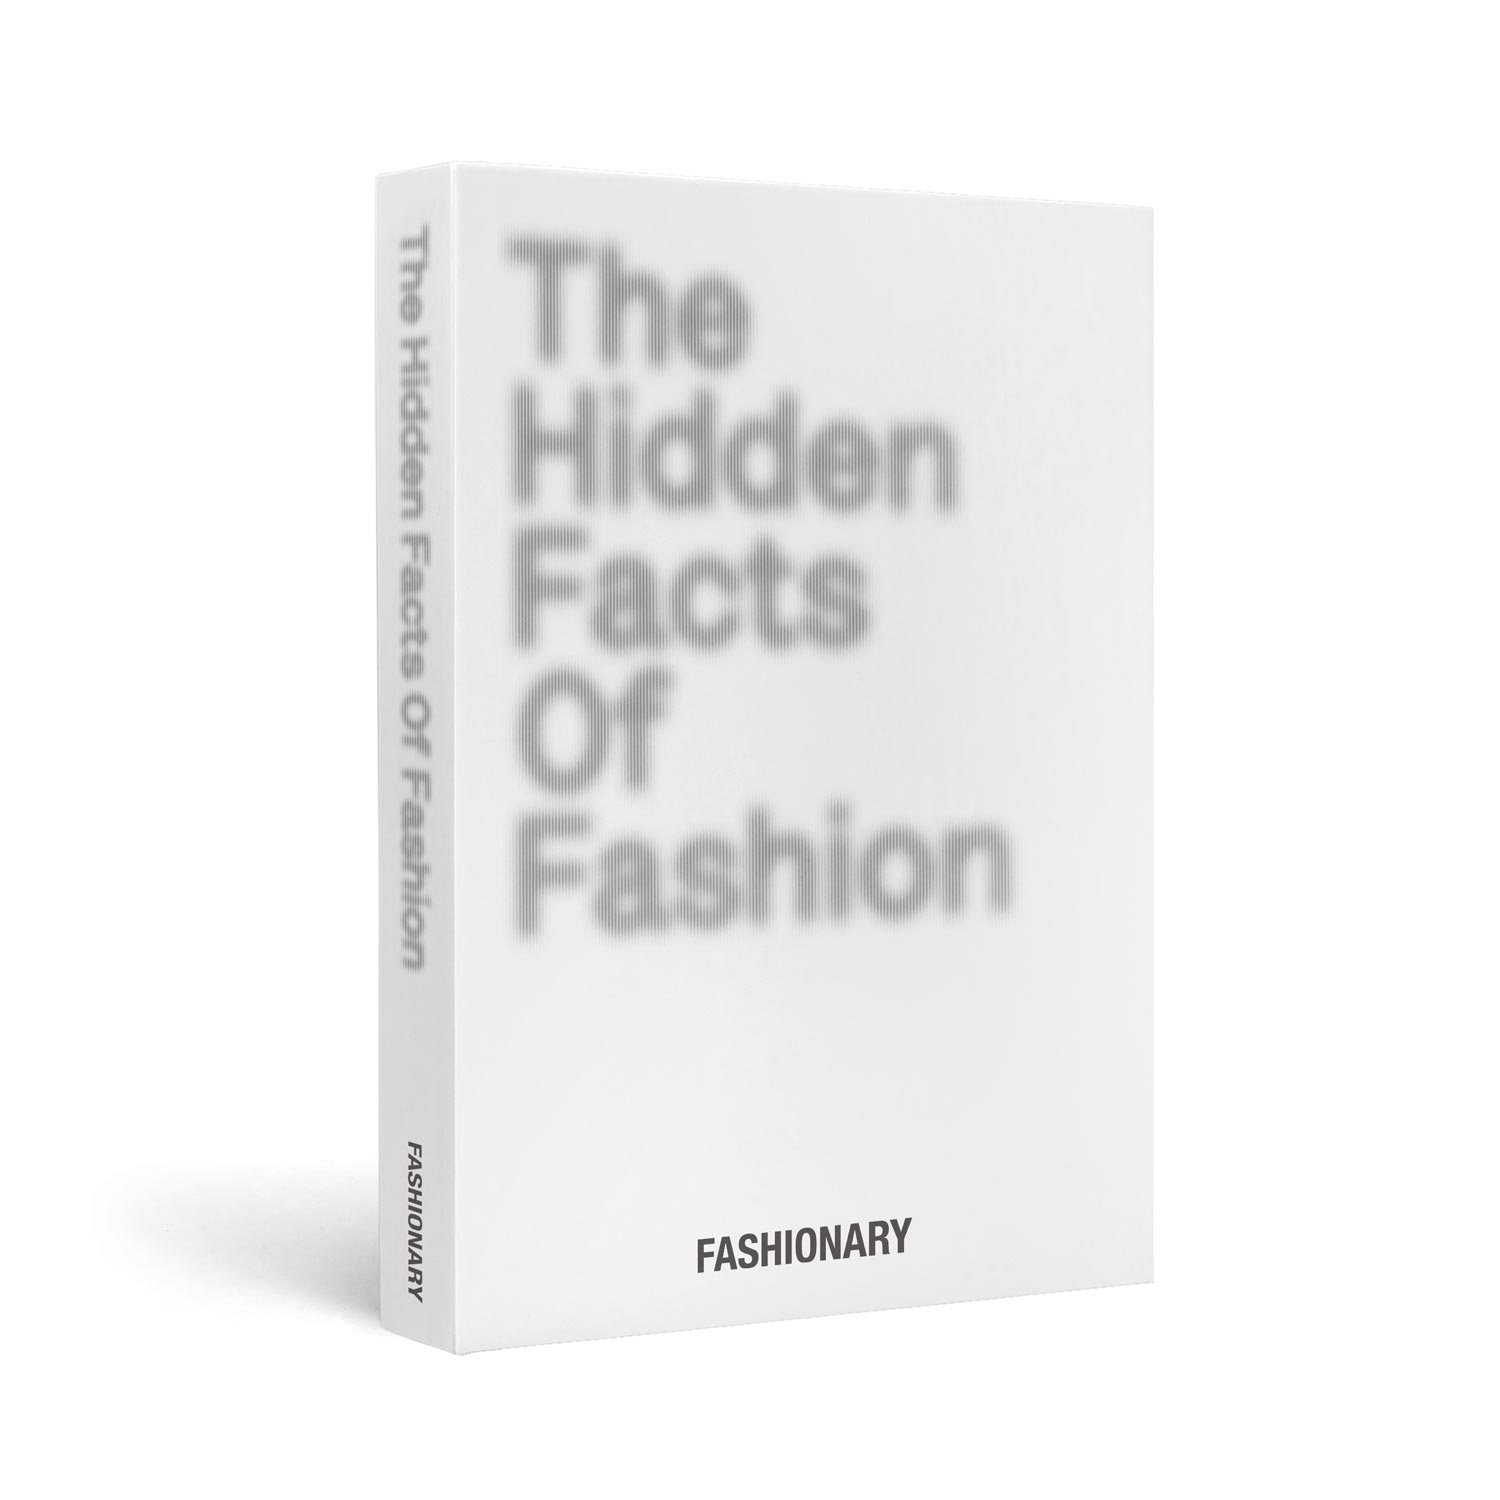 The Hidden Facts of Fashion – Fashionary